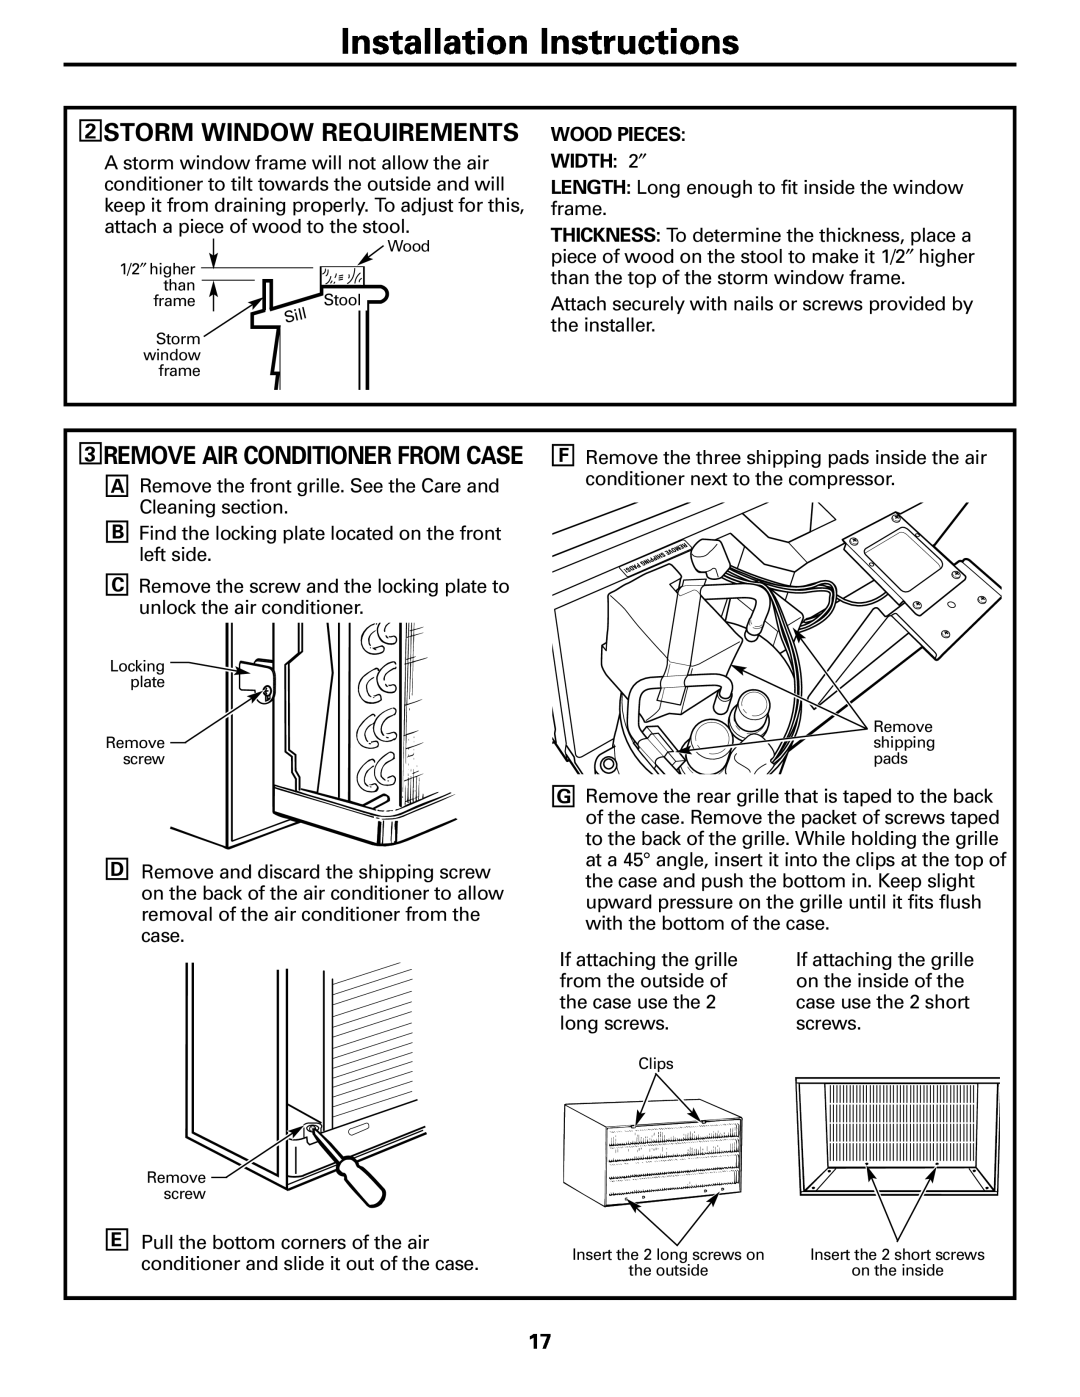 GE LCB AJCS 10, ACB AJCQ 10 2STORM WINDOW REQUIREMENTS, Installation Instructions, 3REMOVE AIR CONDITIONER FROM CASE 